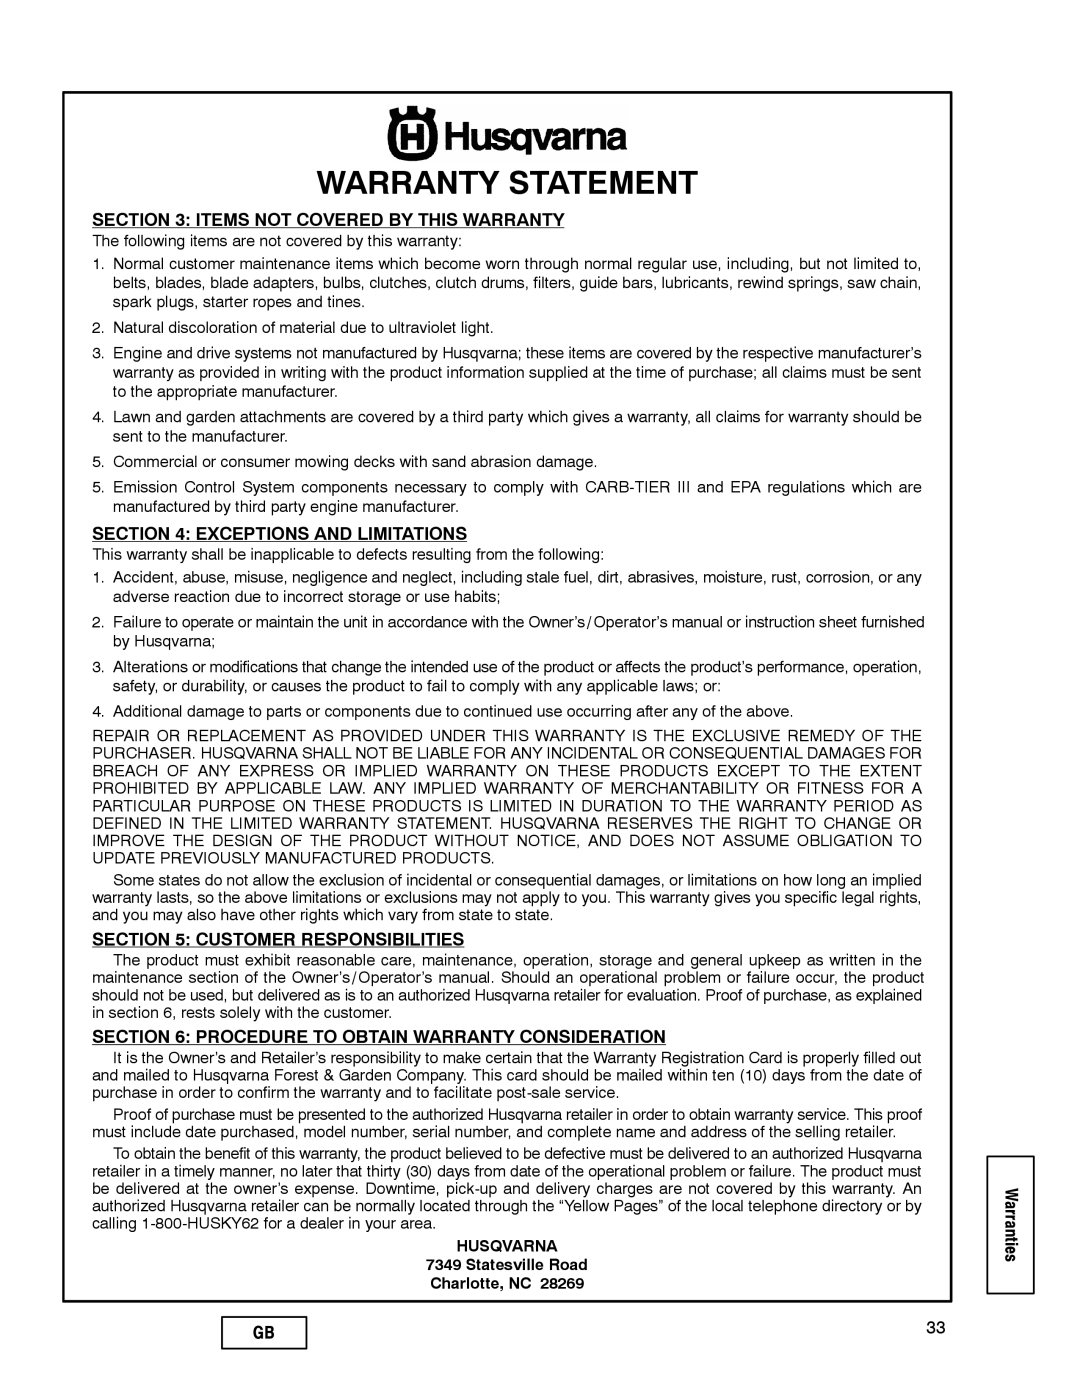 Husqvarna LE389 Items Not Covered By This Warranty, Exceptions And Limitations, Customer Responsibilities, Warranties 